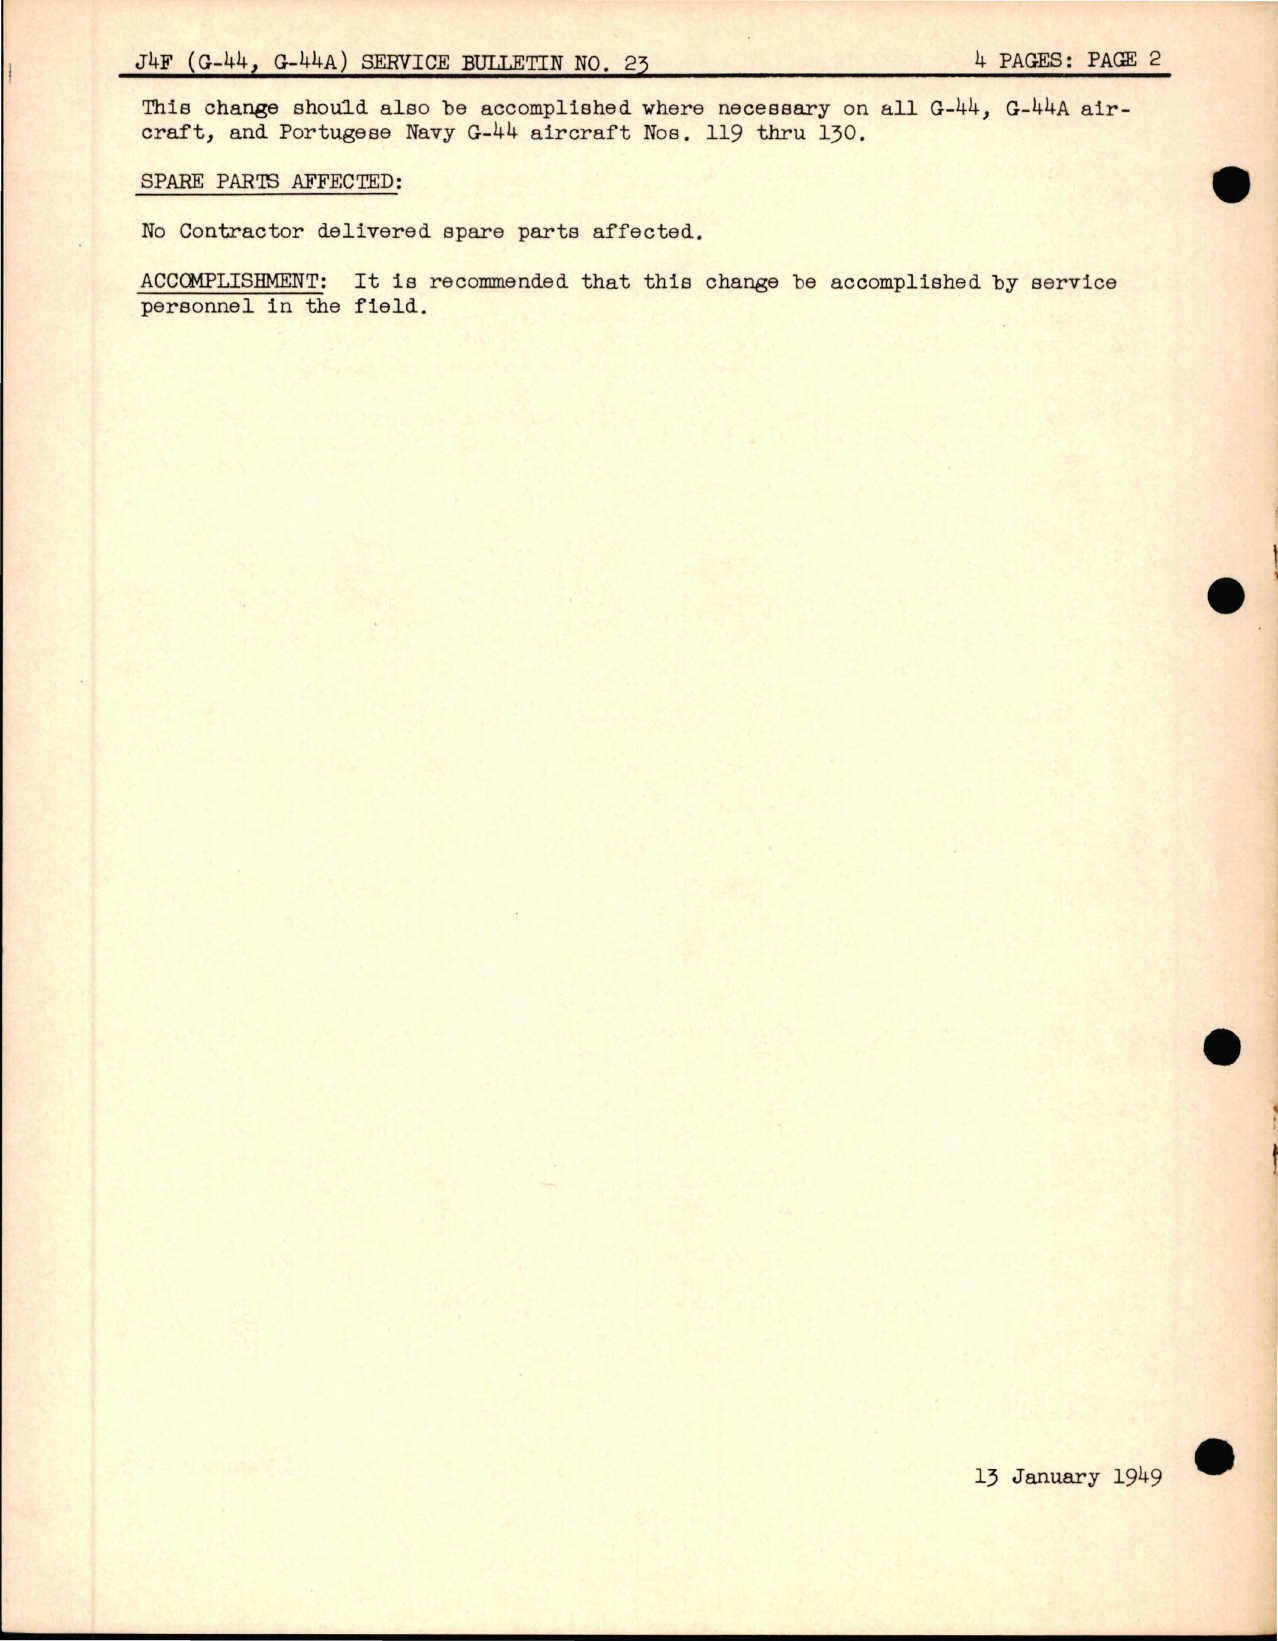 Sample page 5 from AirCorps Library document: Removal of Furnishings, Cover, Gyro Horizon and Directional Gyro Air Filter Body - Model J4F (G-44, G-44A)